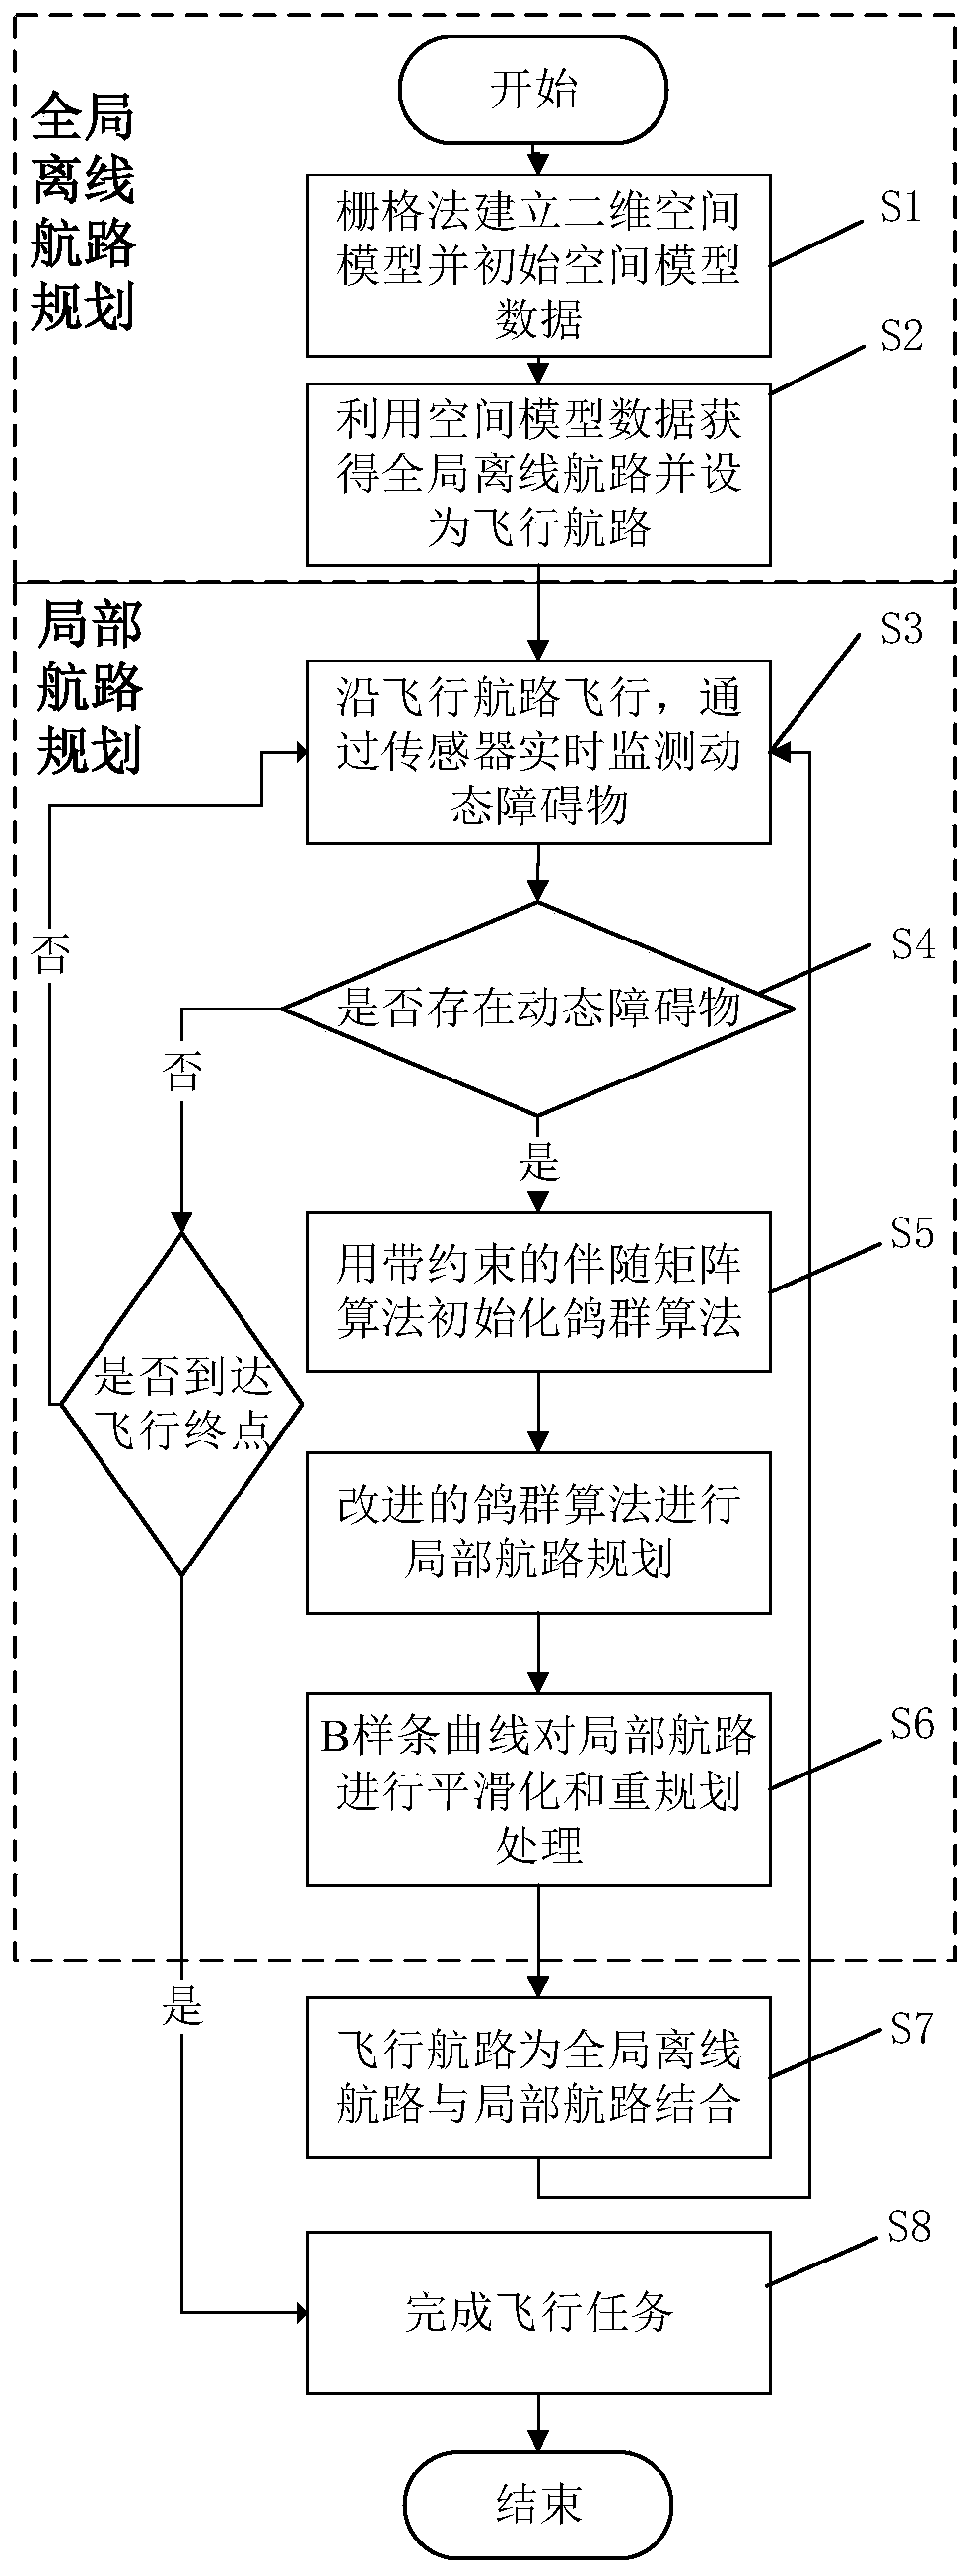 Unmanned aerial vehicle route planning and obstacle avoiding method